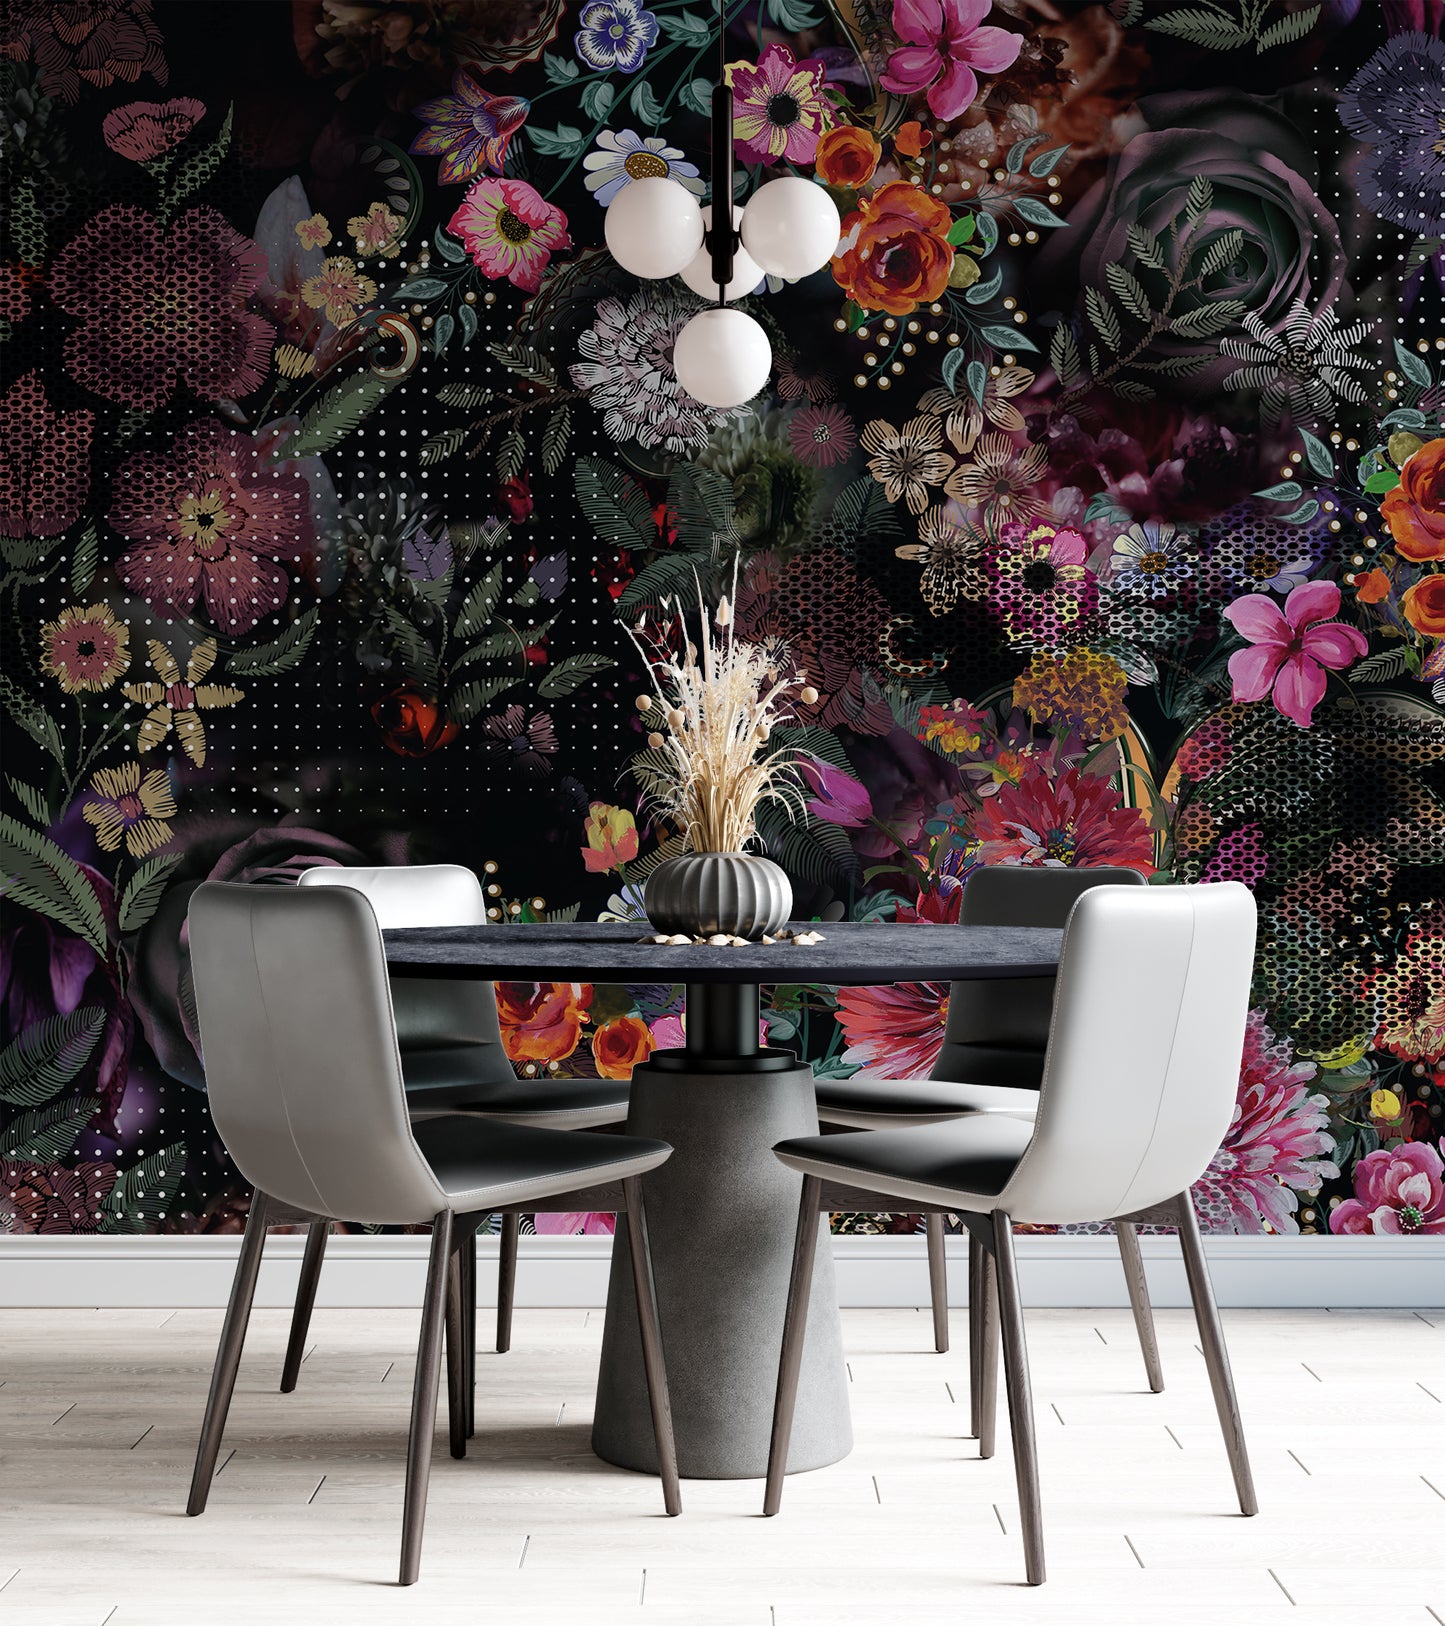 Melli Mello Rock & Rose photowall wallpaper colorful floral dots deco eyecatcher be different room deco 